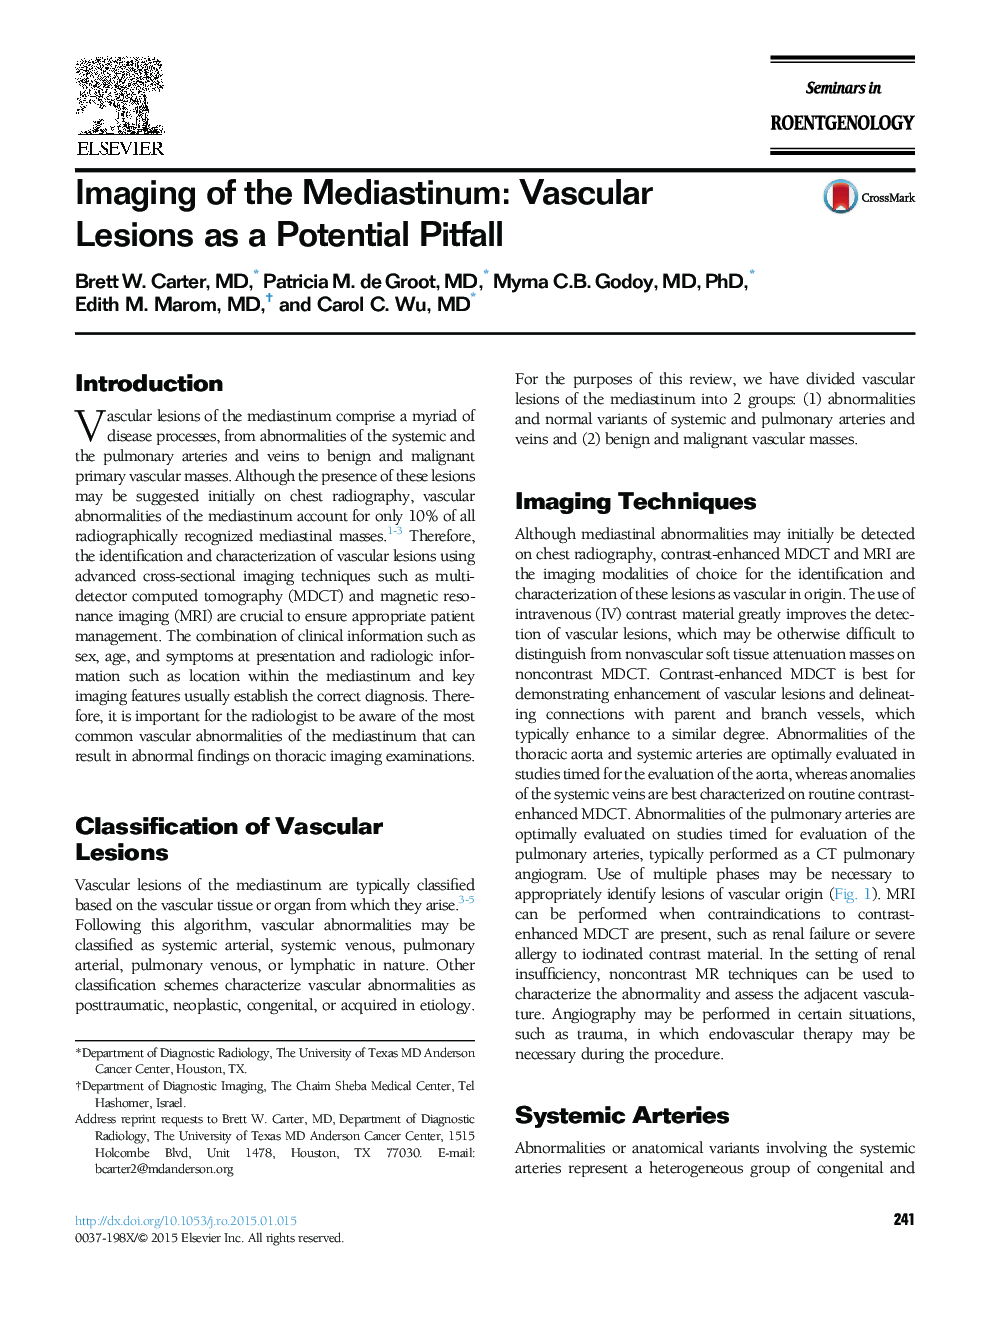 Imaging of the Mediastinum: Vascular Lesions as a Potential Pitfall